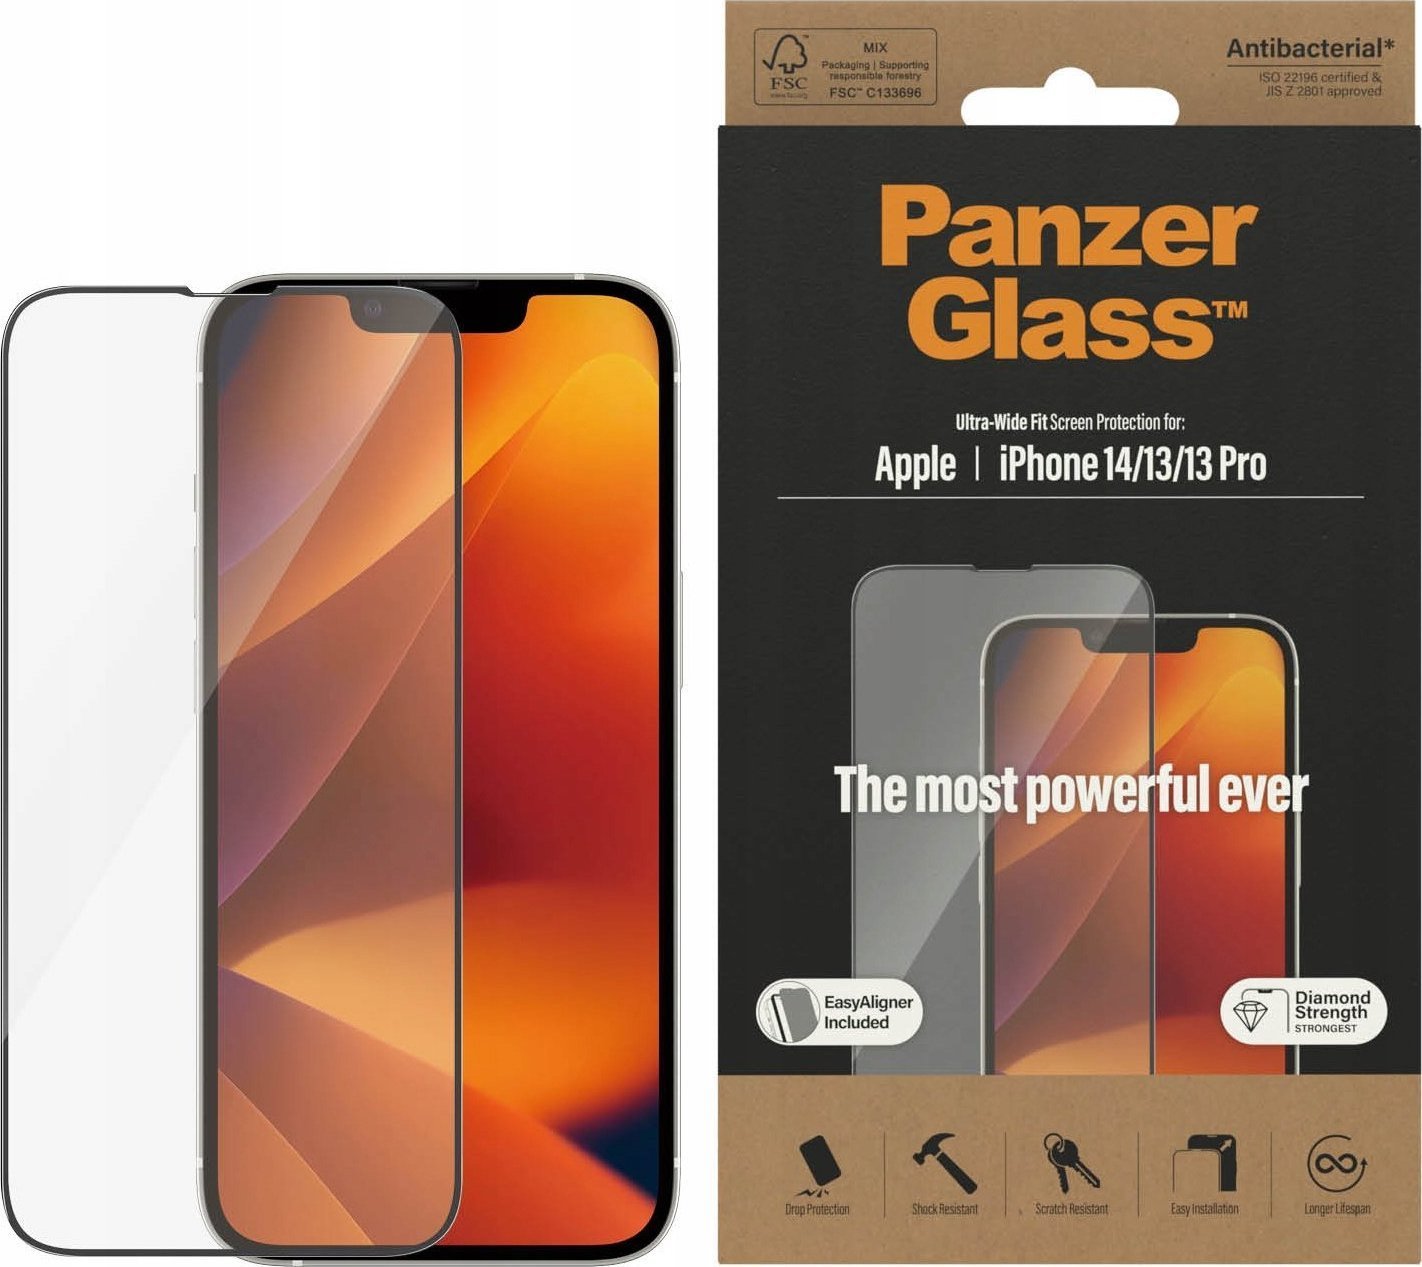 PanzerGlass PanzerGlass Ultra-Wide Fit iPhone 14 / 13 Pro / 13 6,1` Screen Protection Antibacterial Easy Aligner Included 2783